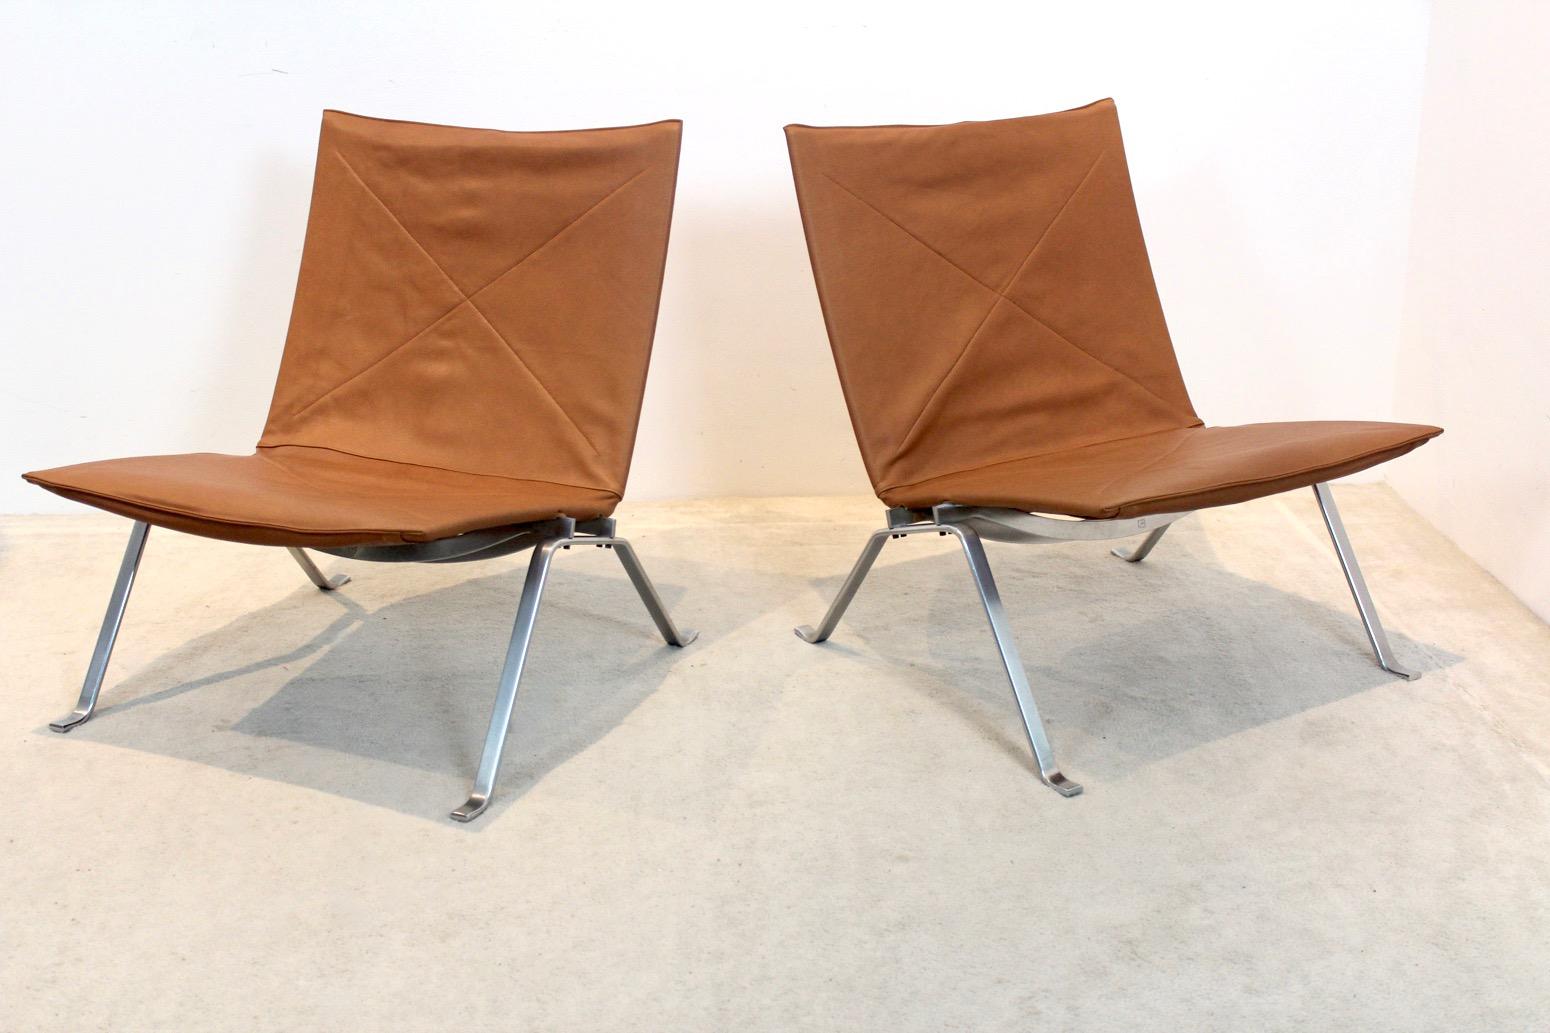 Exquisite Cognac Leather PK22 chairs by Poul Kjærholm for E. Kold Christensen For Sale 3